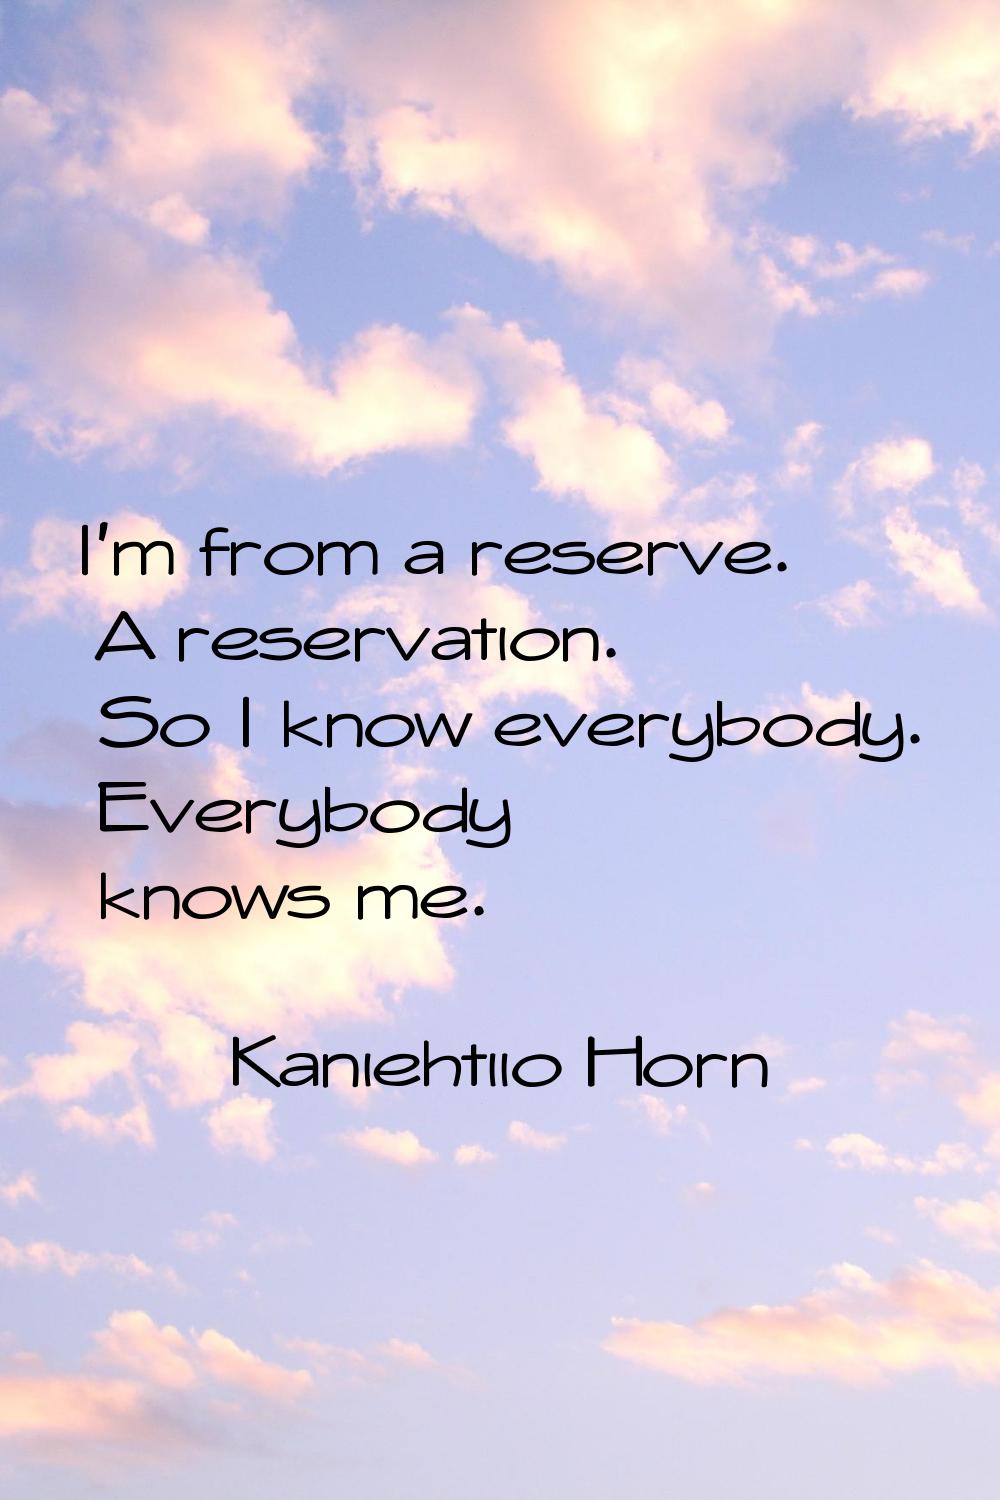 I'm from a reserve. A reservation. So I know everybody. Everybody knows me.